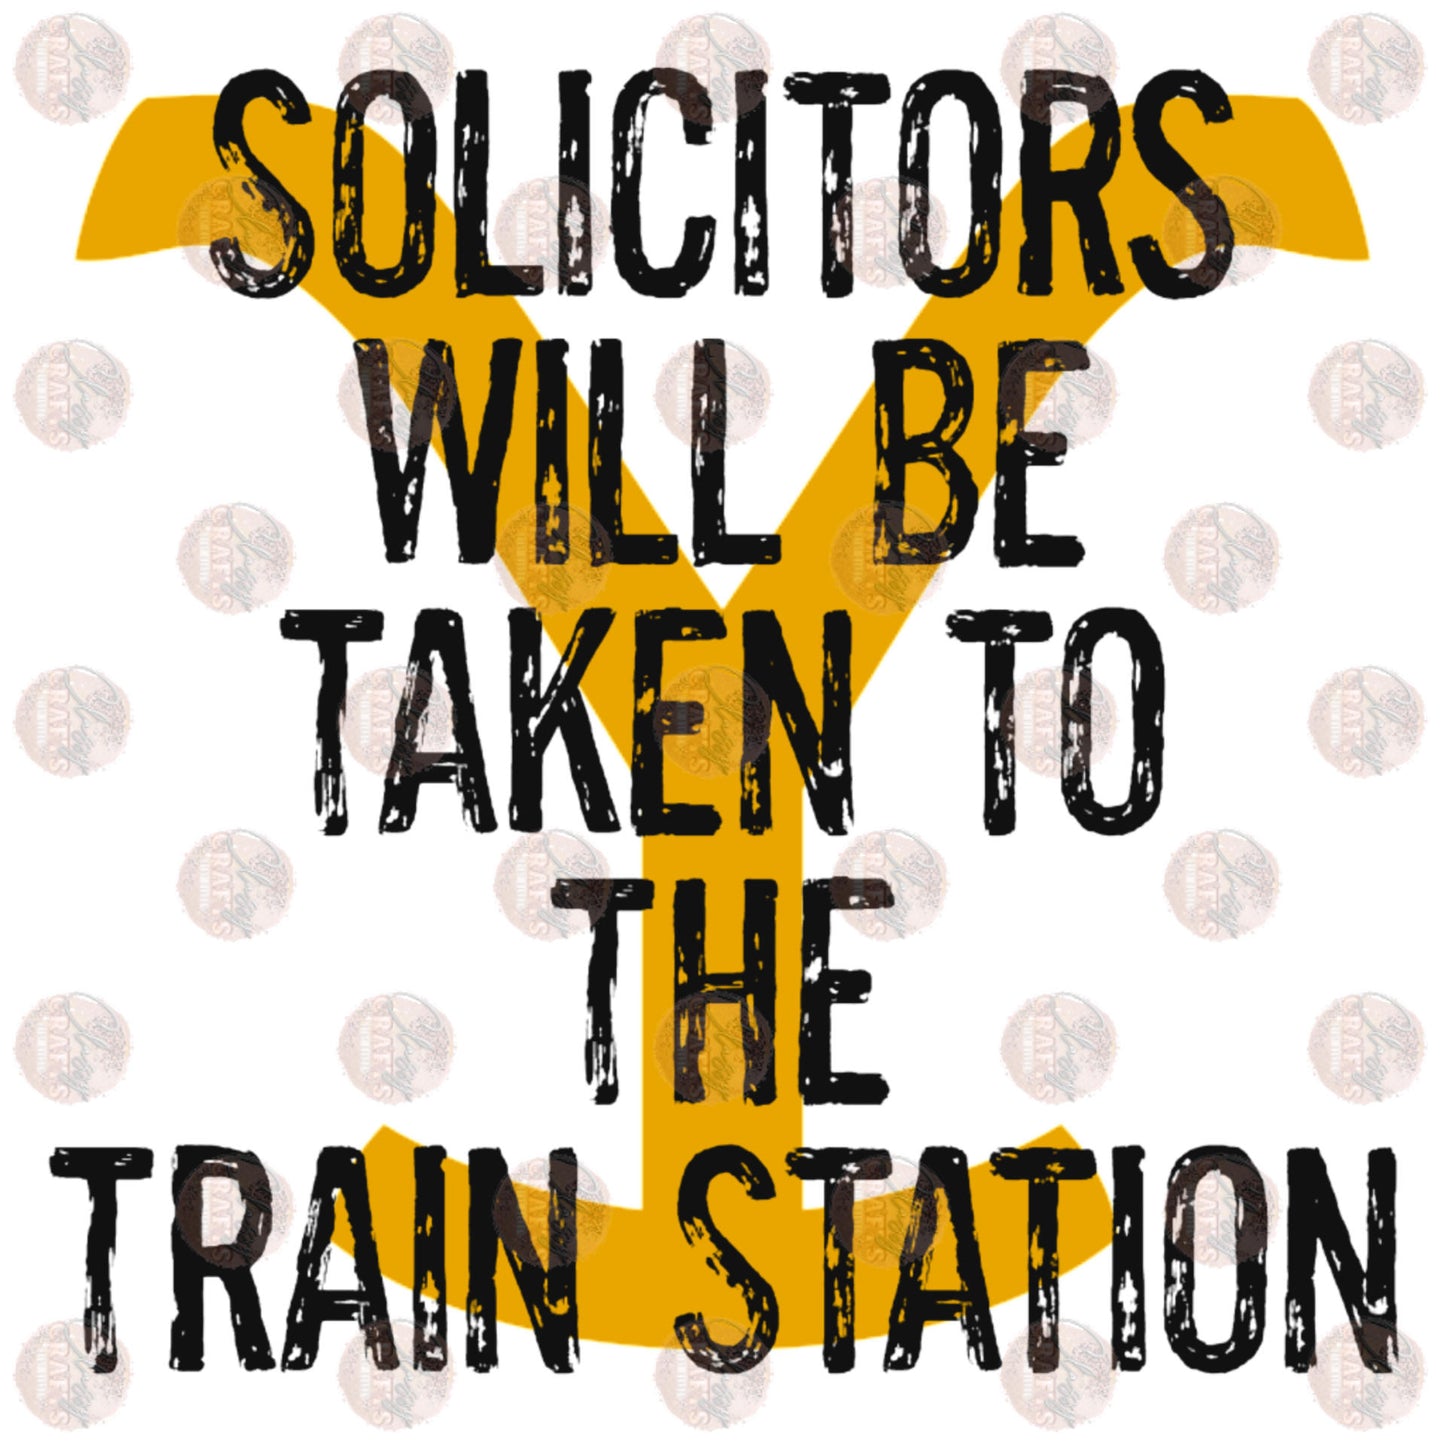 Solicitors - Sublimation Transfer